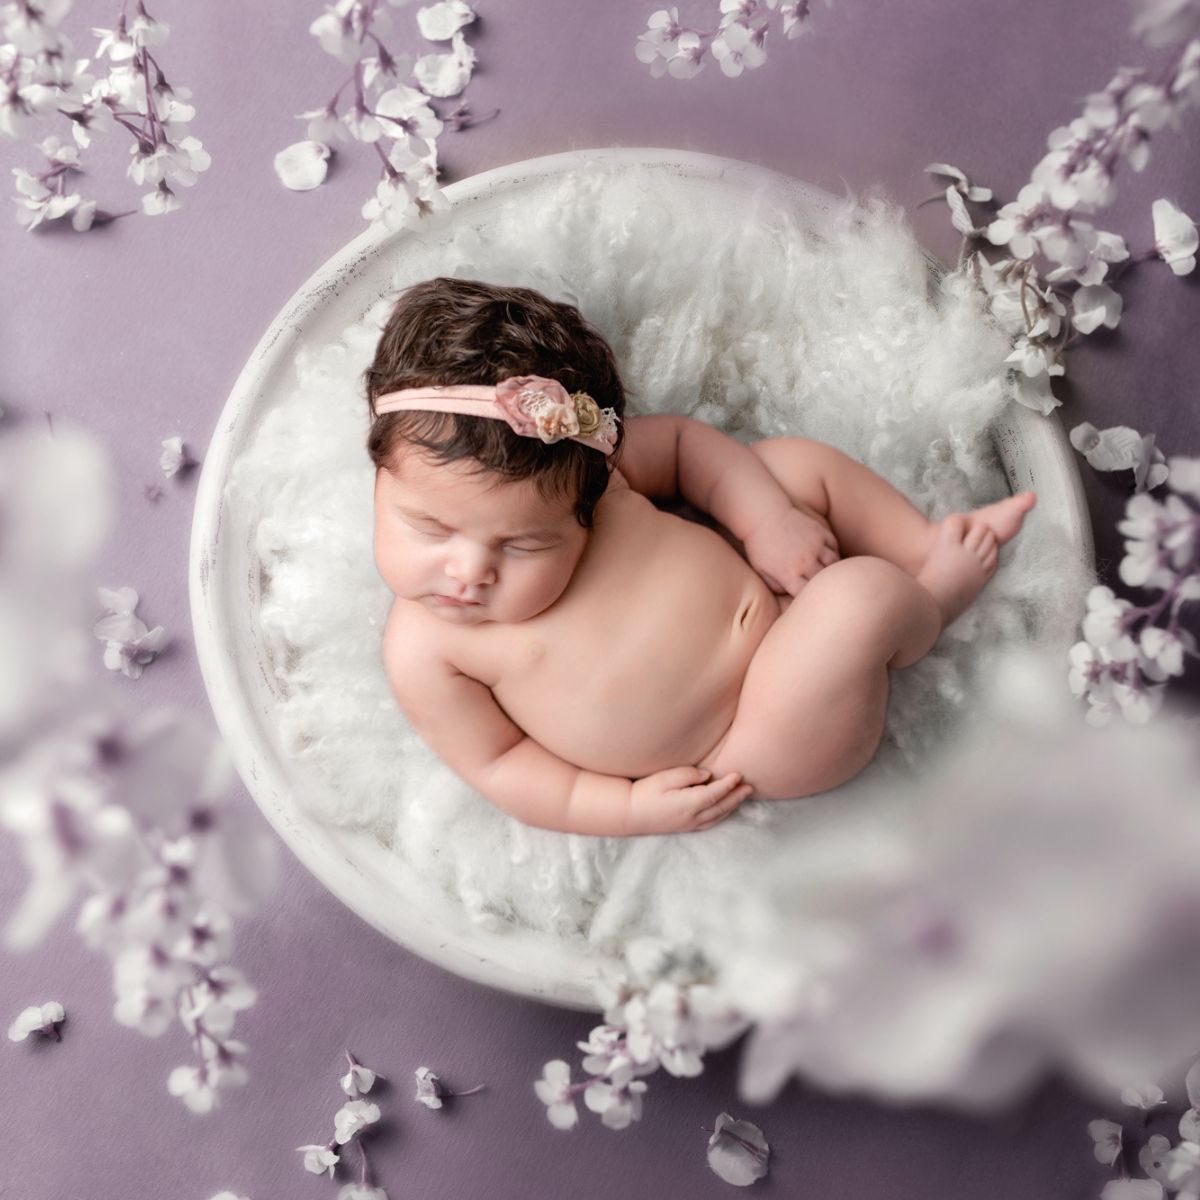 Fine art studio newborn image of baby girl laying in a bowl with a purple backdrop and surrounded by white floral